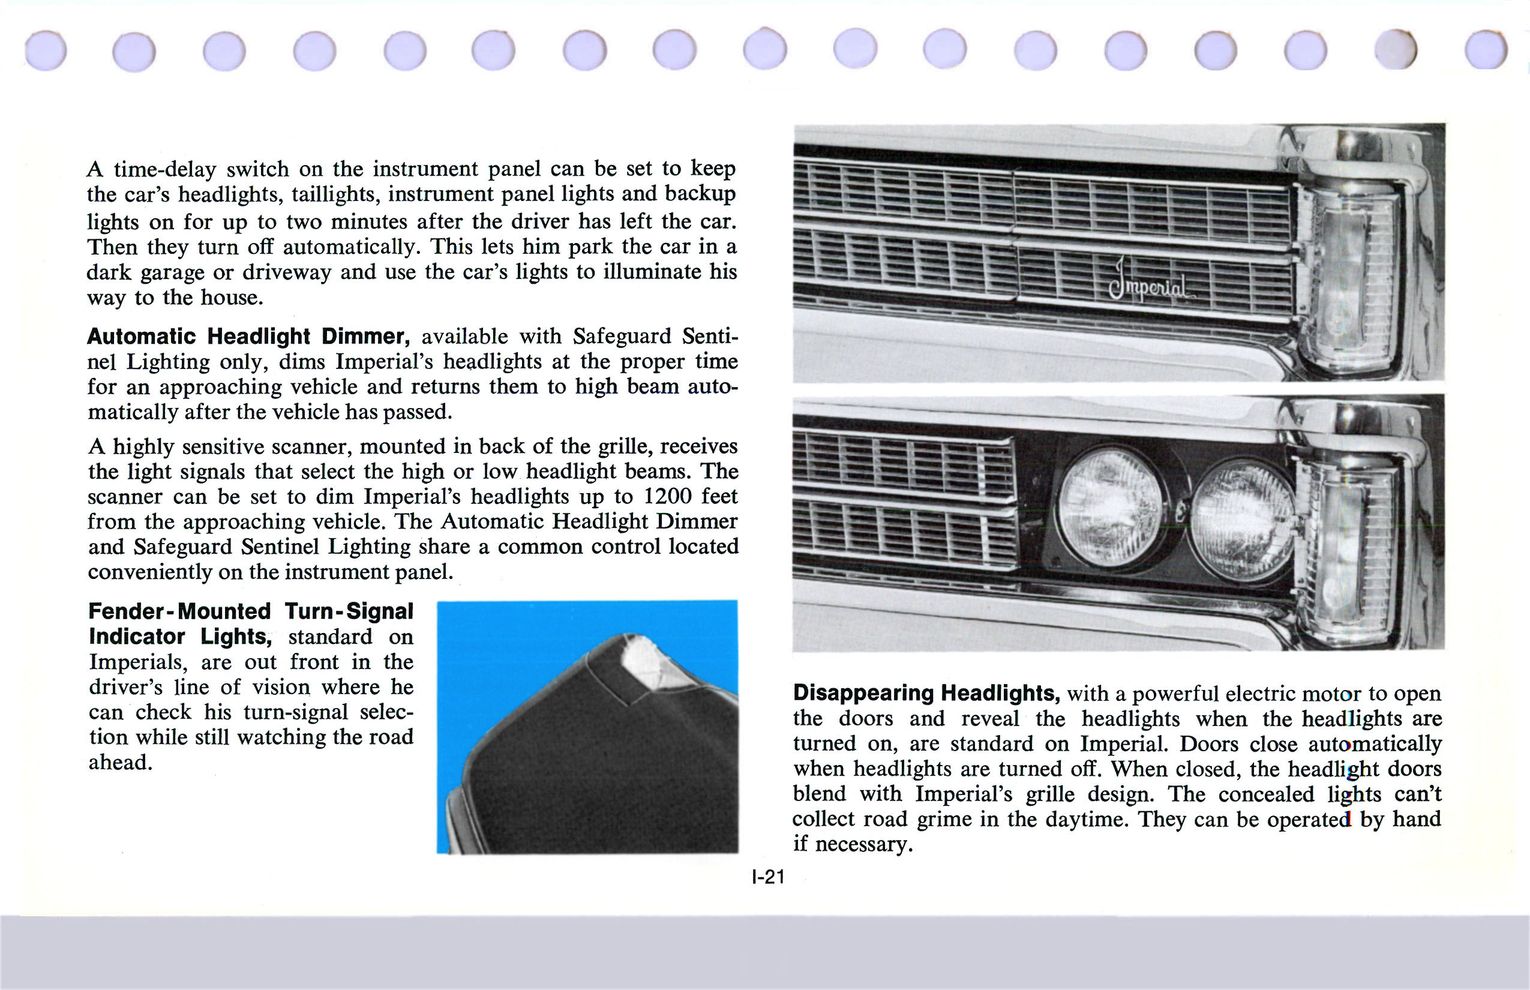 1969 Chrysler Data Book Page 42